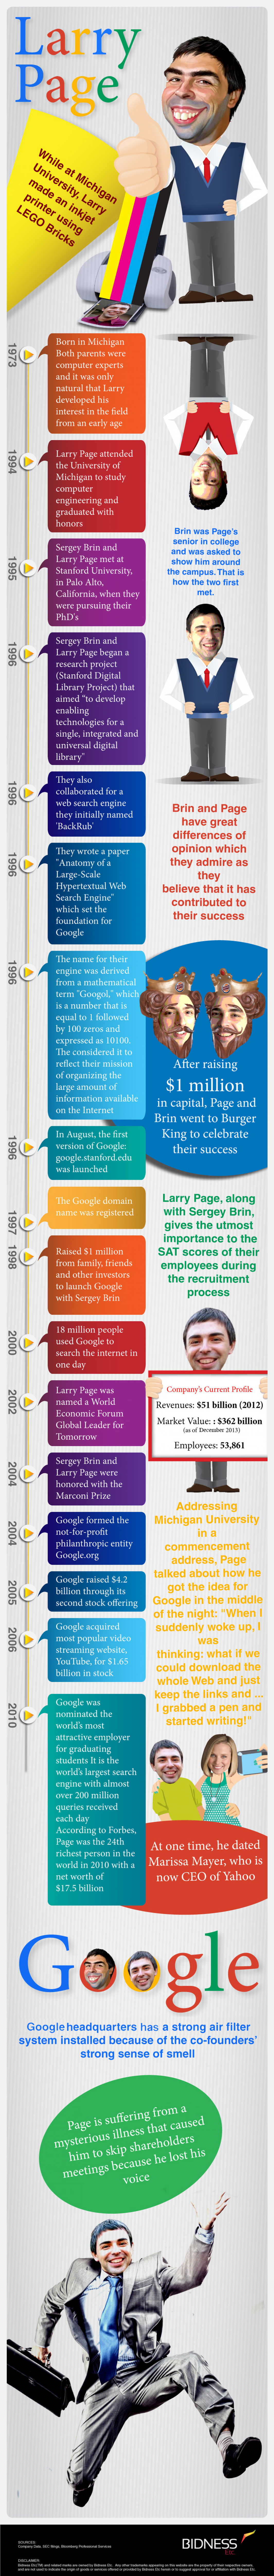 The Genius of Larry Page - Bidness Etc Infographic